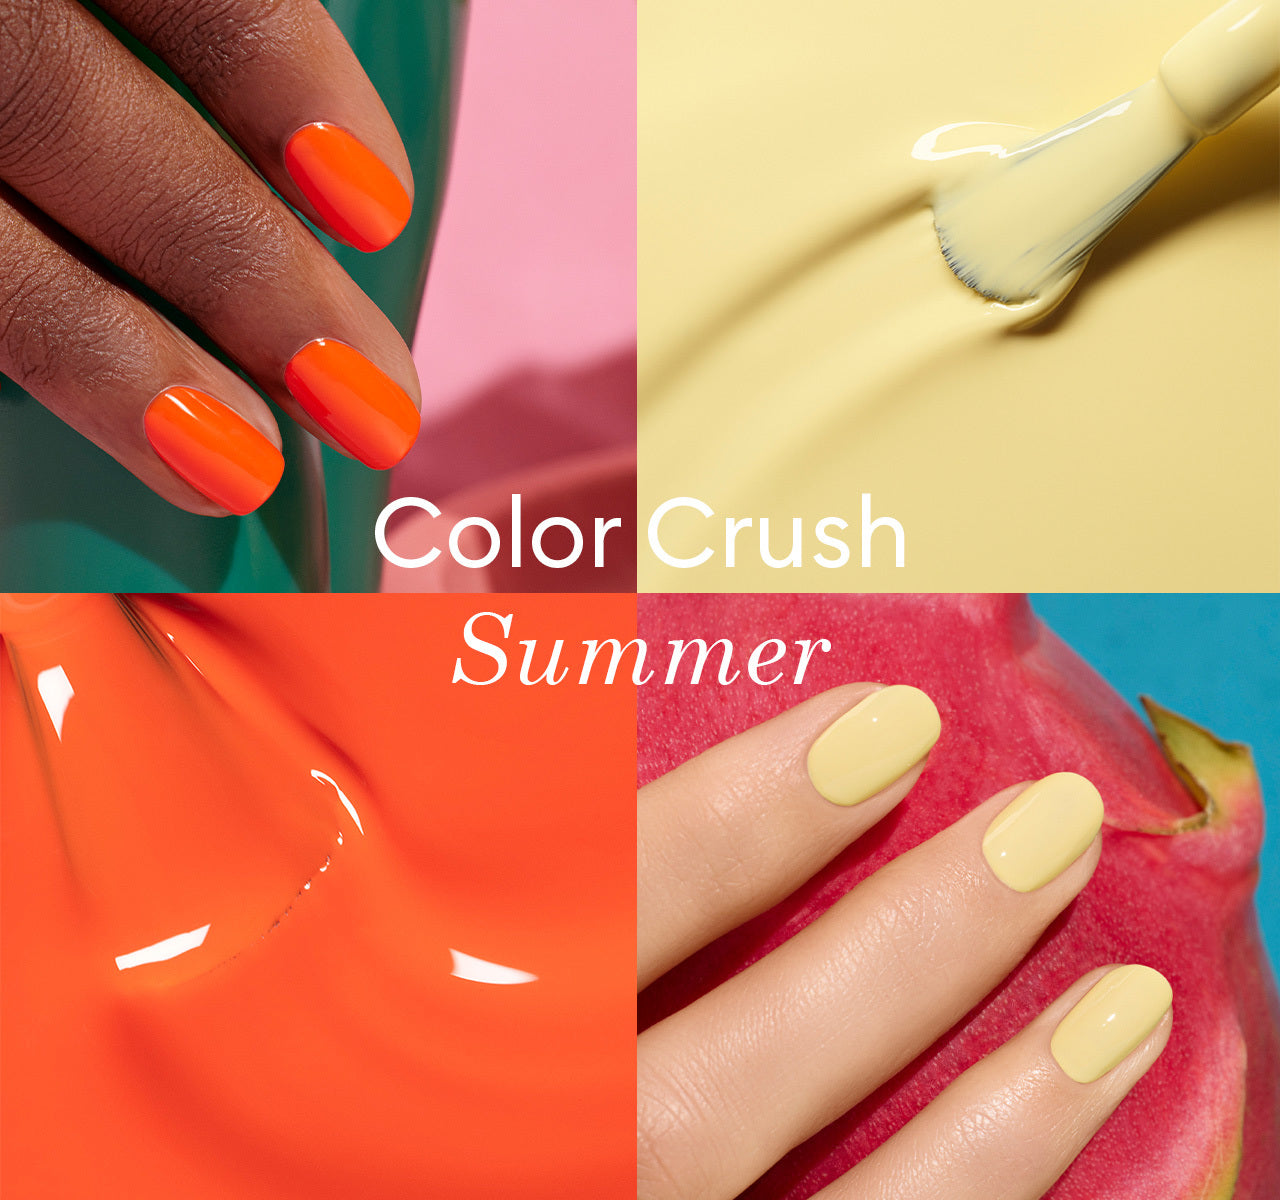 What polish colors should you wear on your nails this summer?